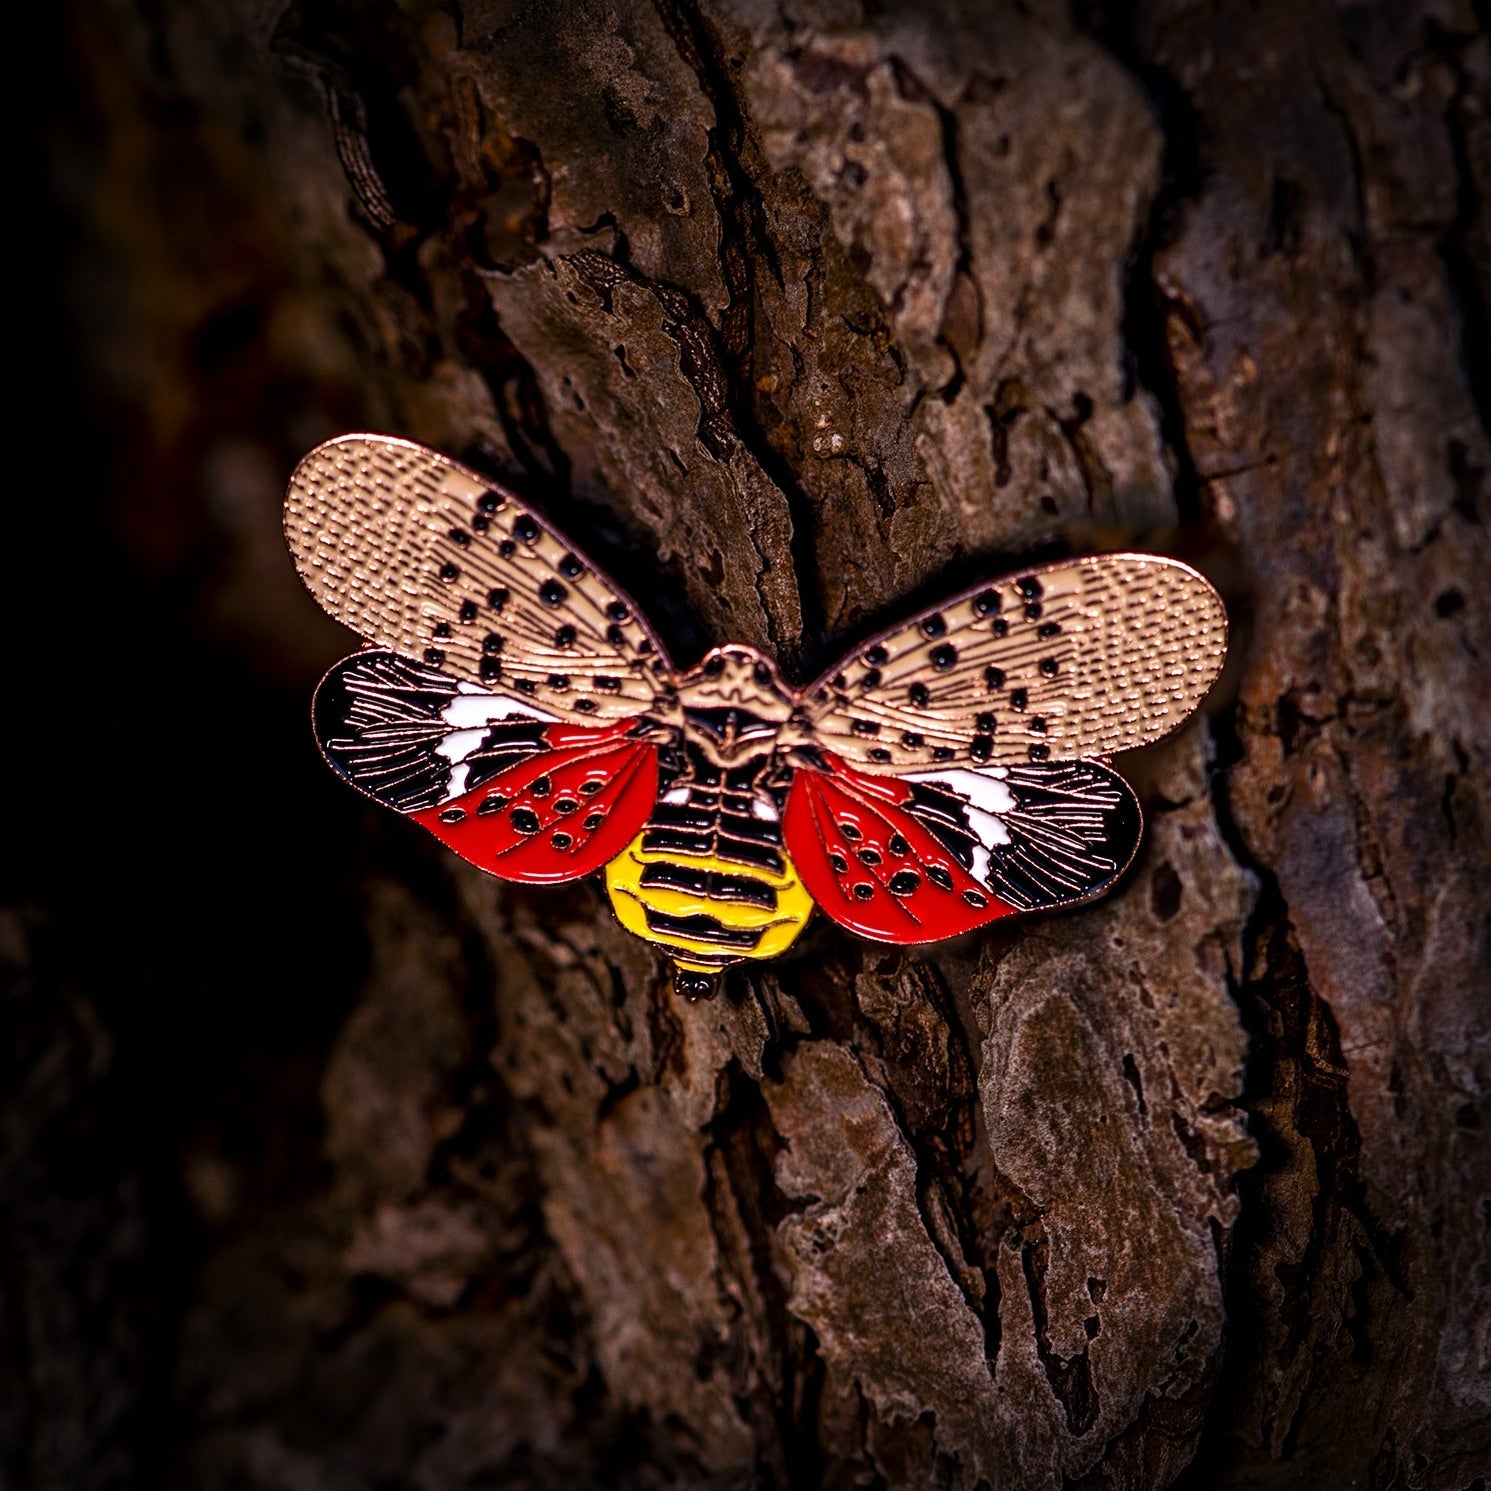 February's Bug Box: the Spotted Lanternfly - The Roving House